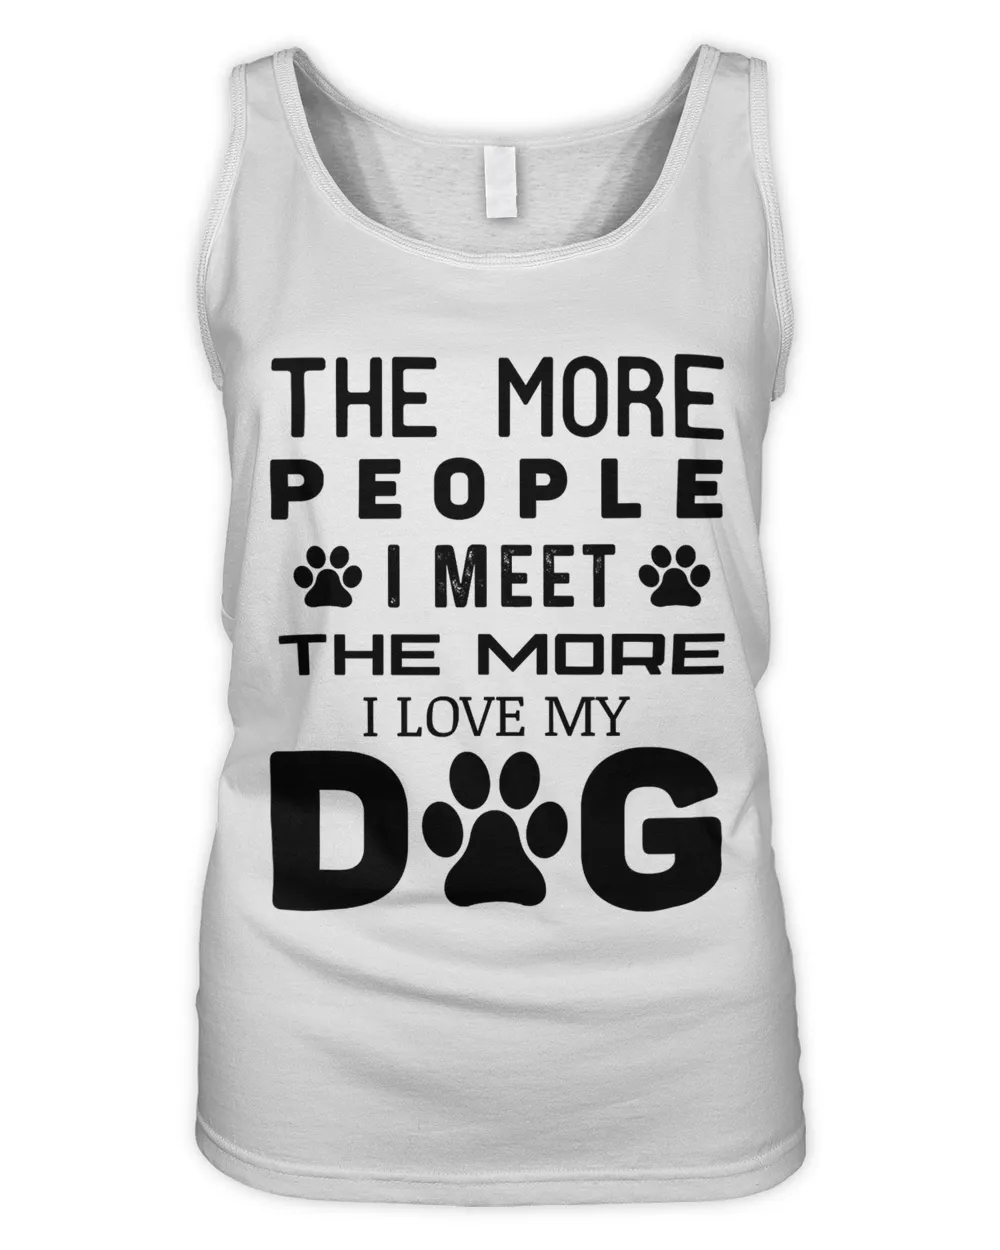 The More People I Meet The More I Love My Dog - Funny Dog T-Shirt